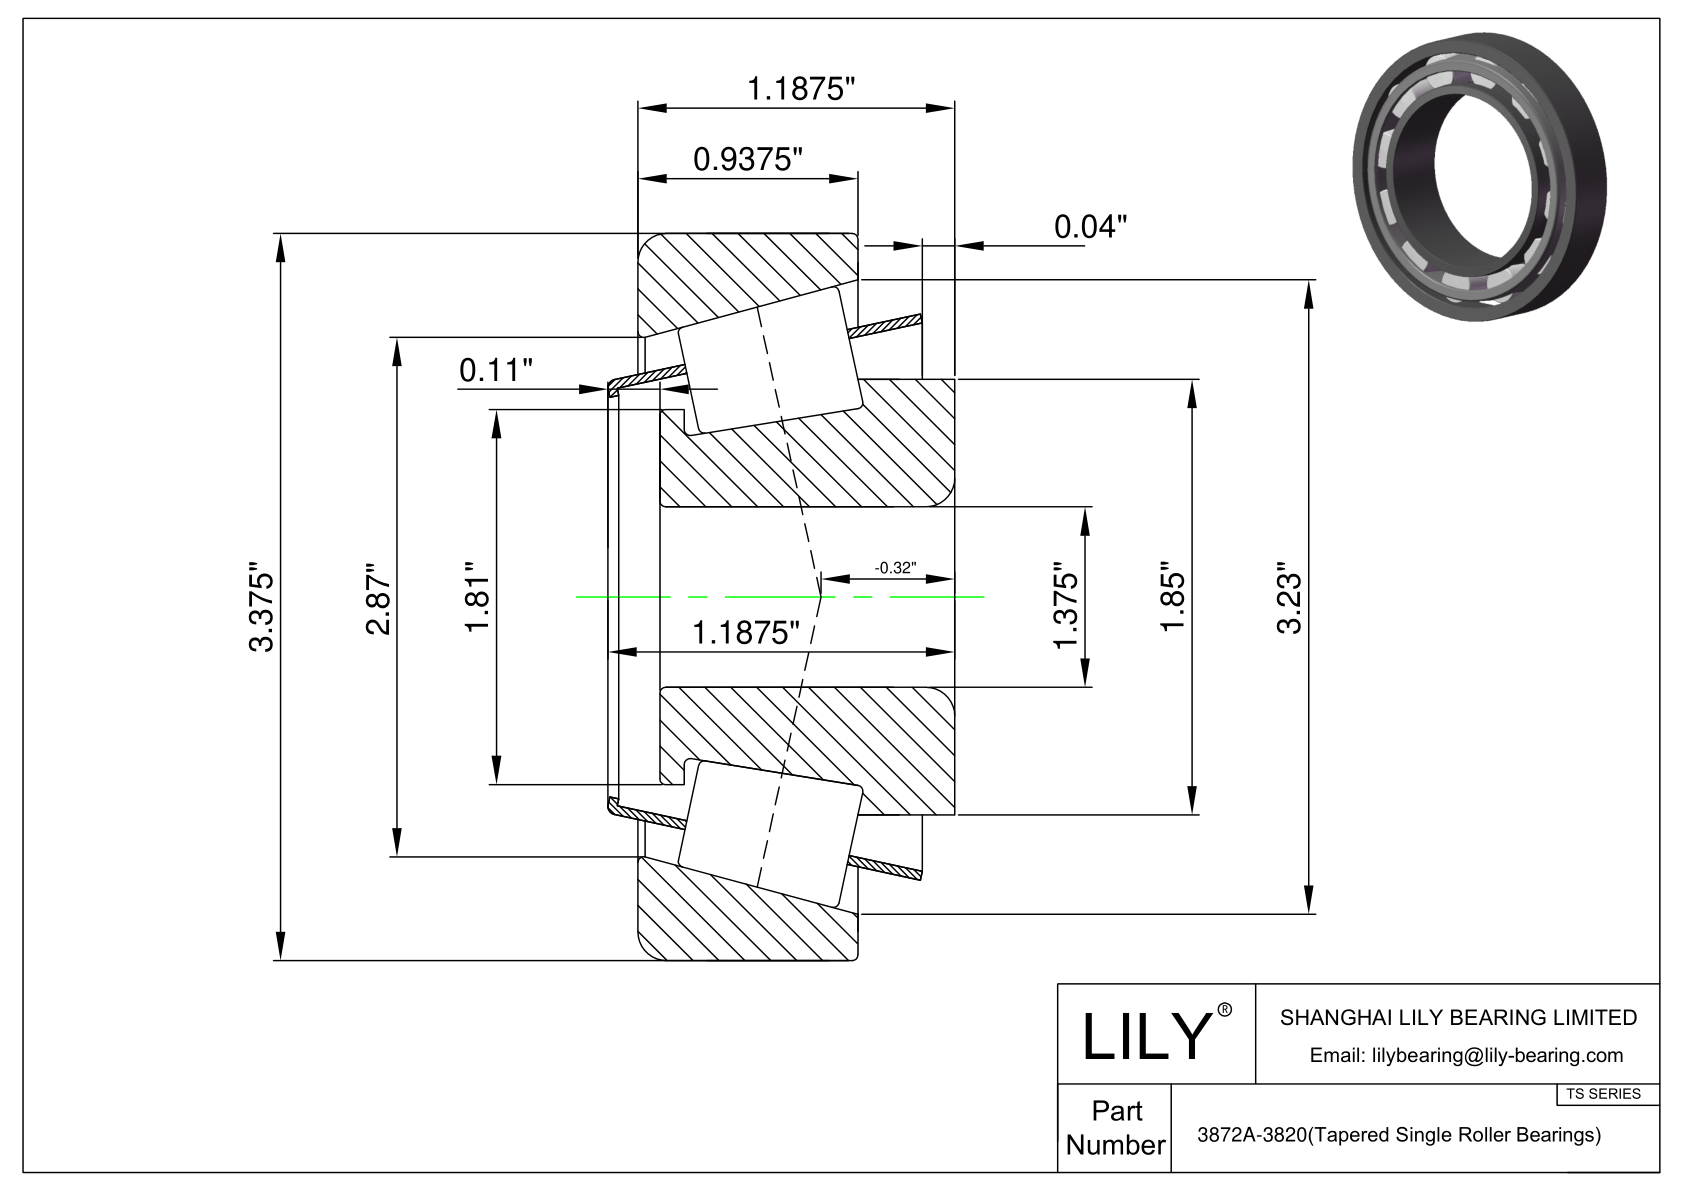 3872A-3820 TS (Tapered Single Roller Bearings) (Imperial) cad drawing